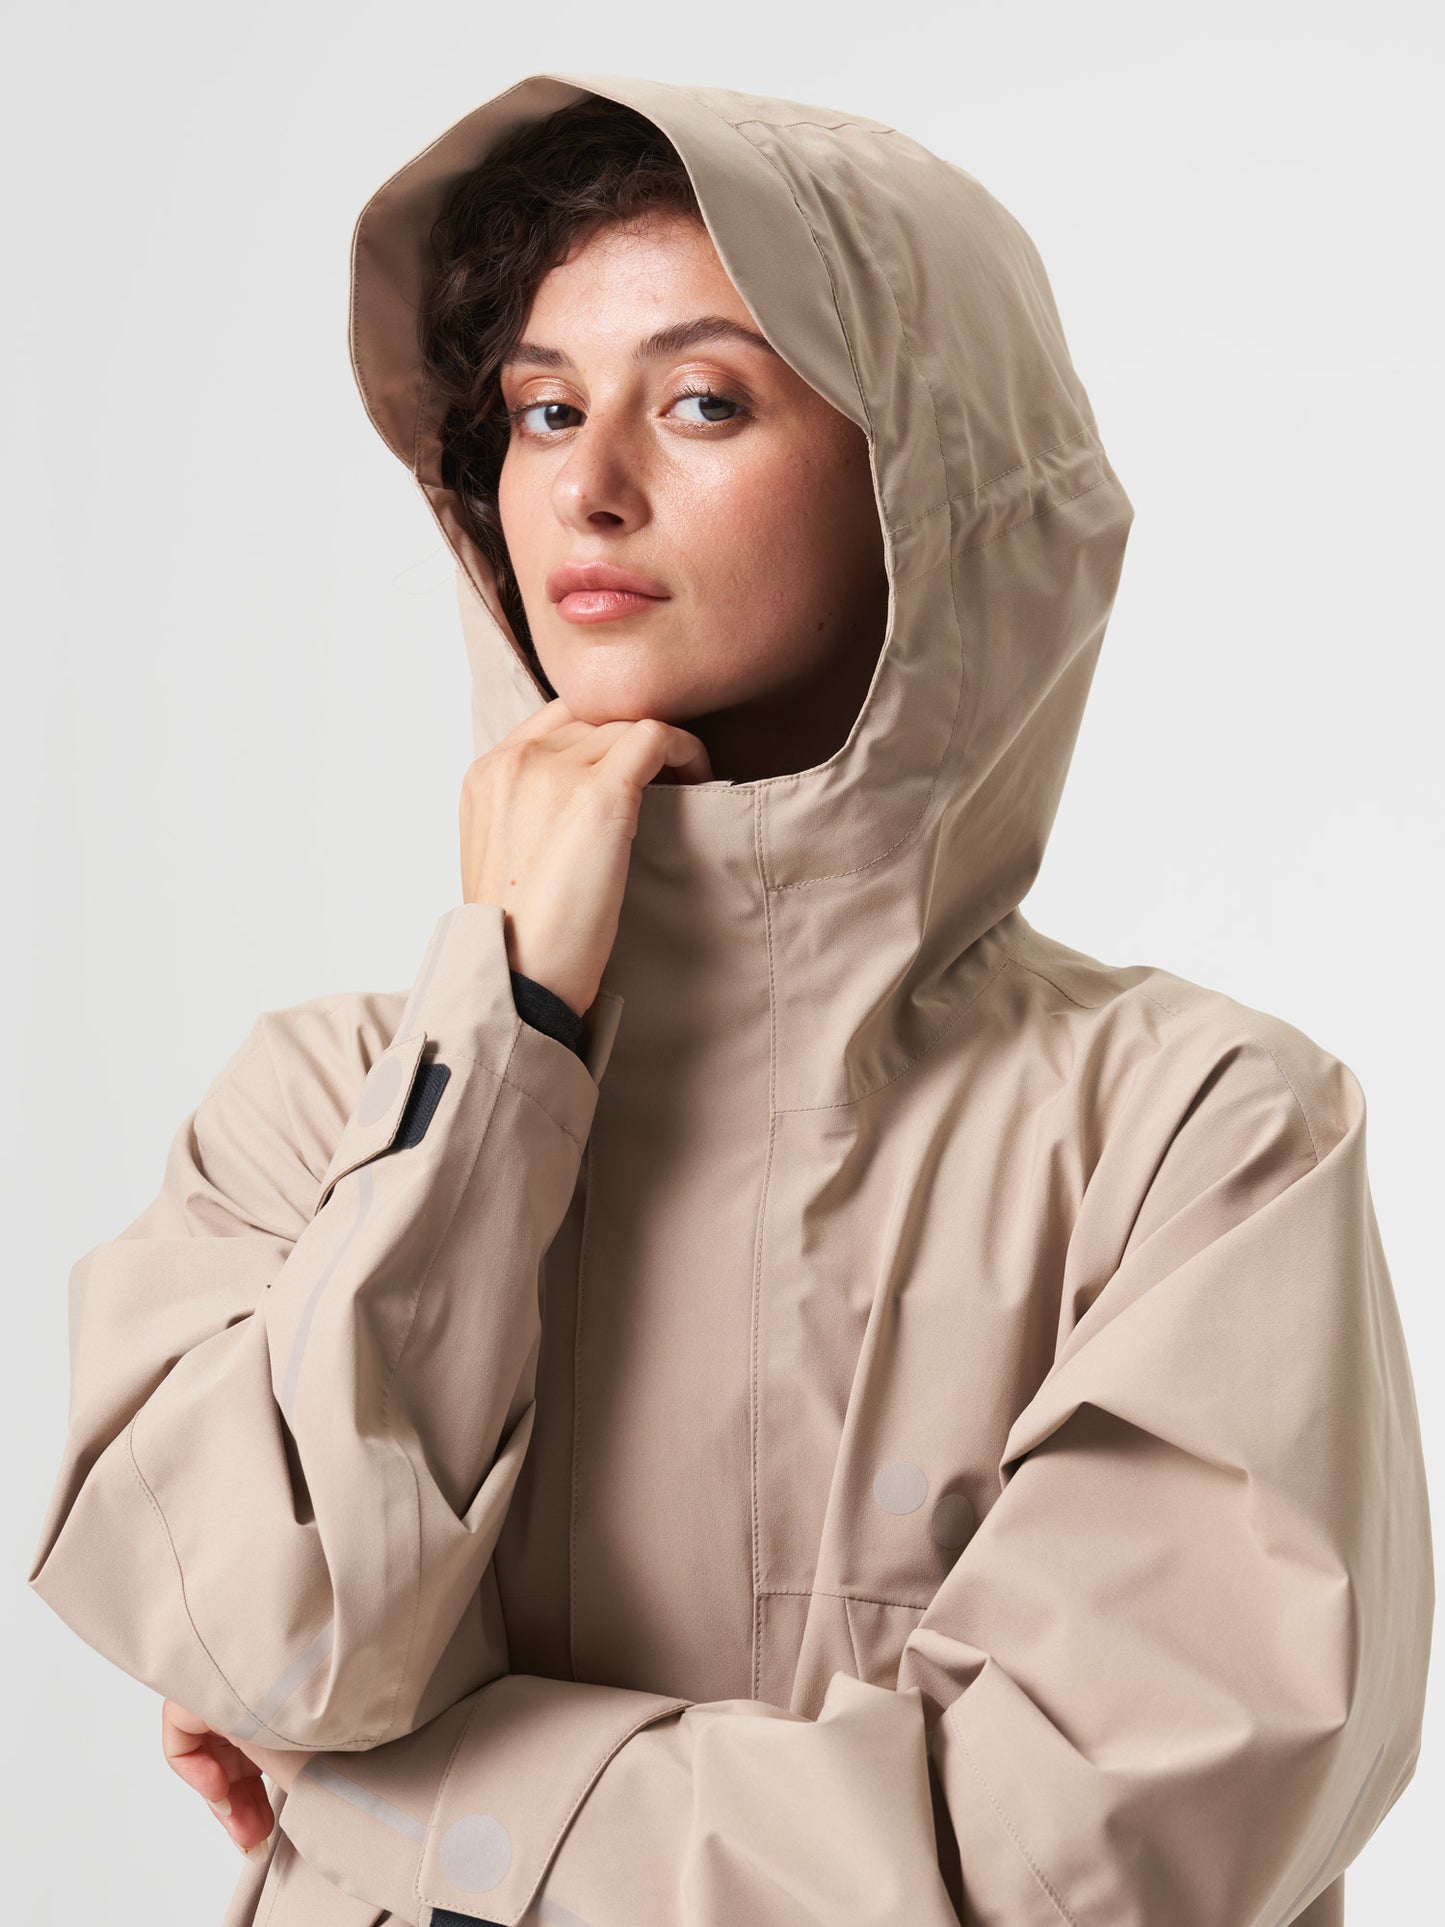 Aestech Rain Parka: Stylish and functional protection from wind